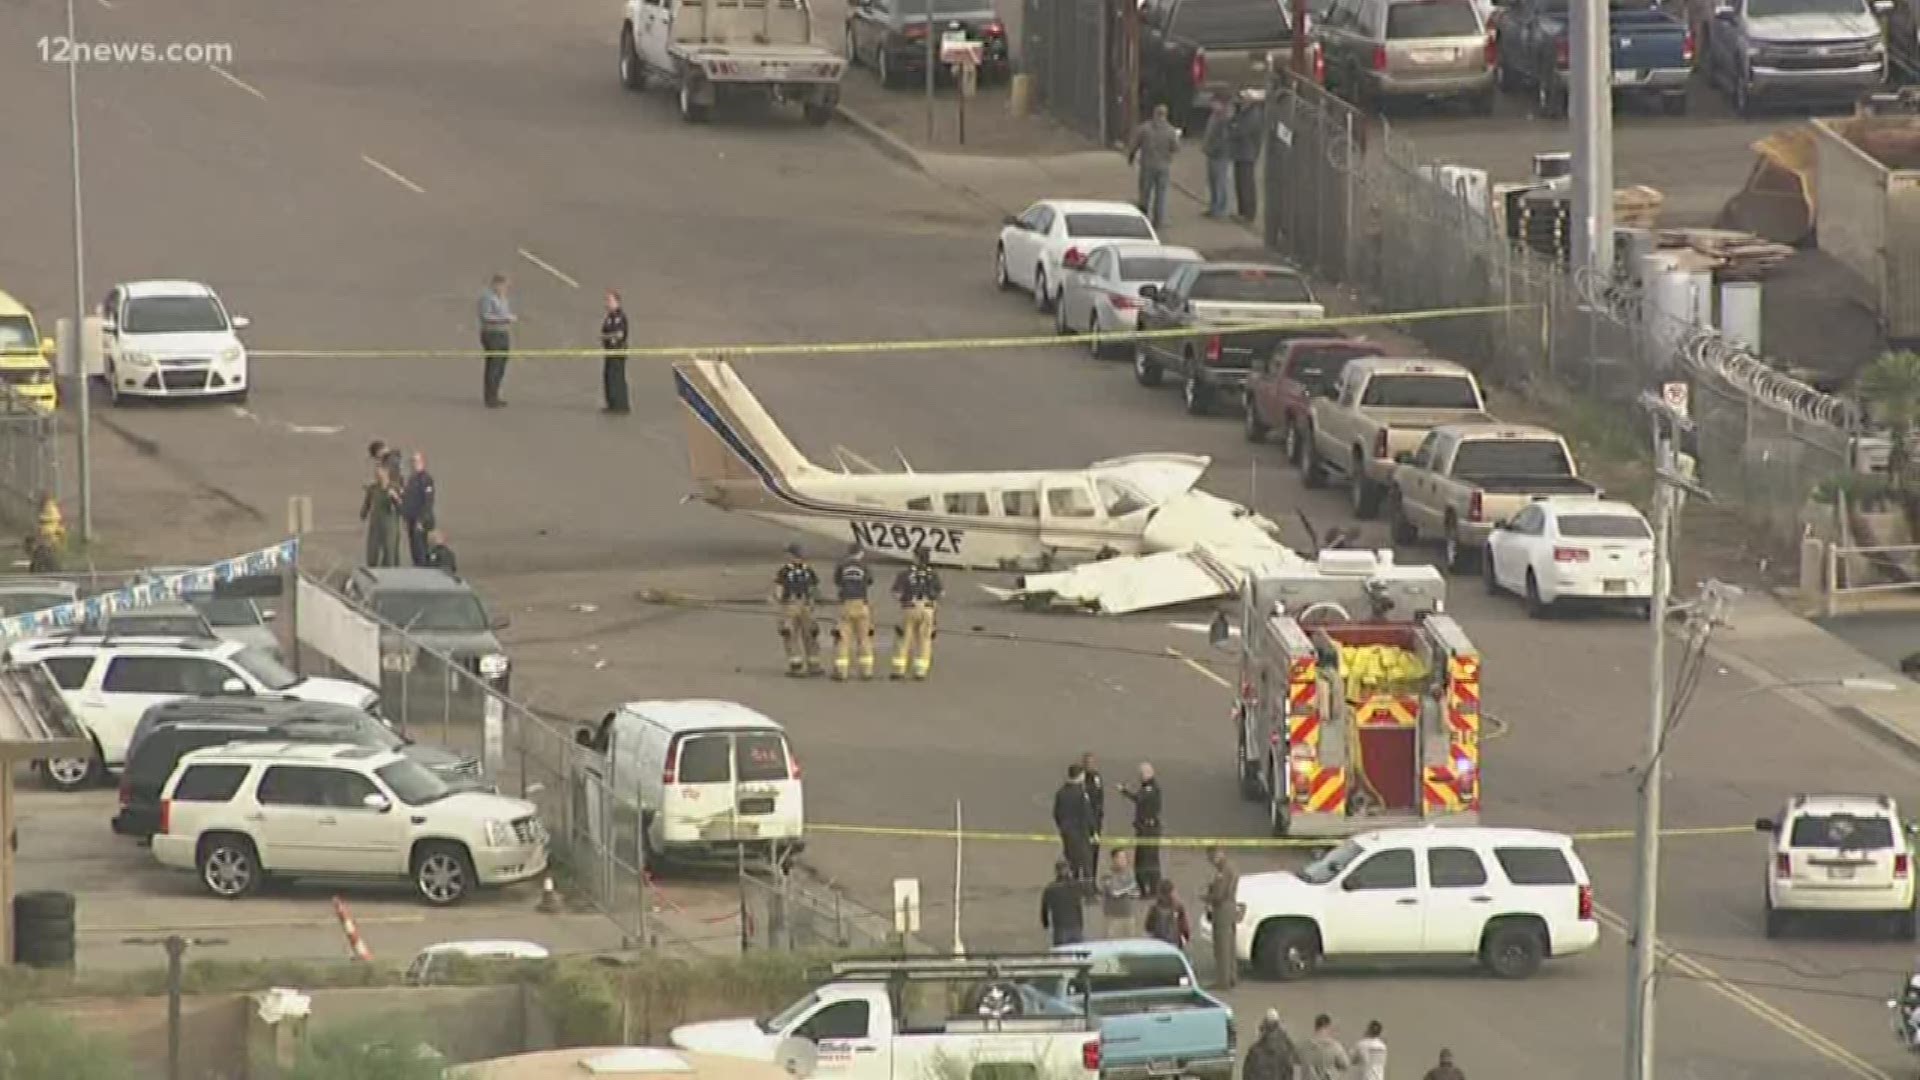 The pilot of a twin engine plane crash landed into an auto lot in North Phoenix Wednesday morning. The pilot and his passenger both walked away from the crash.